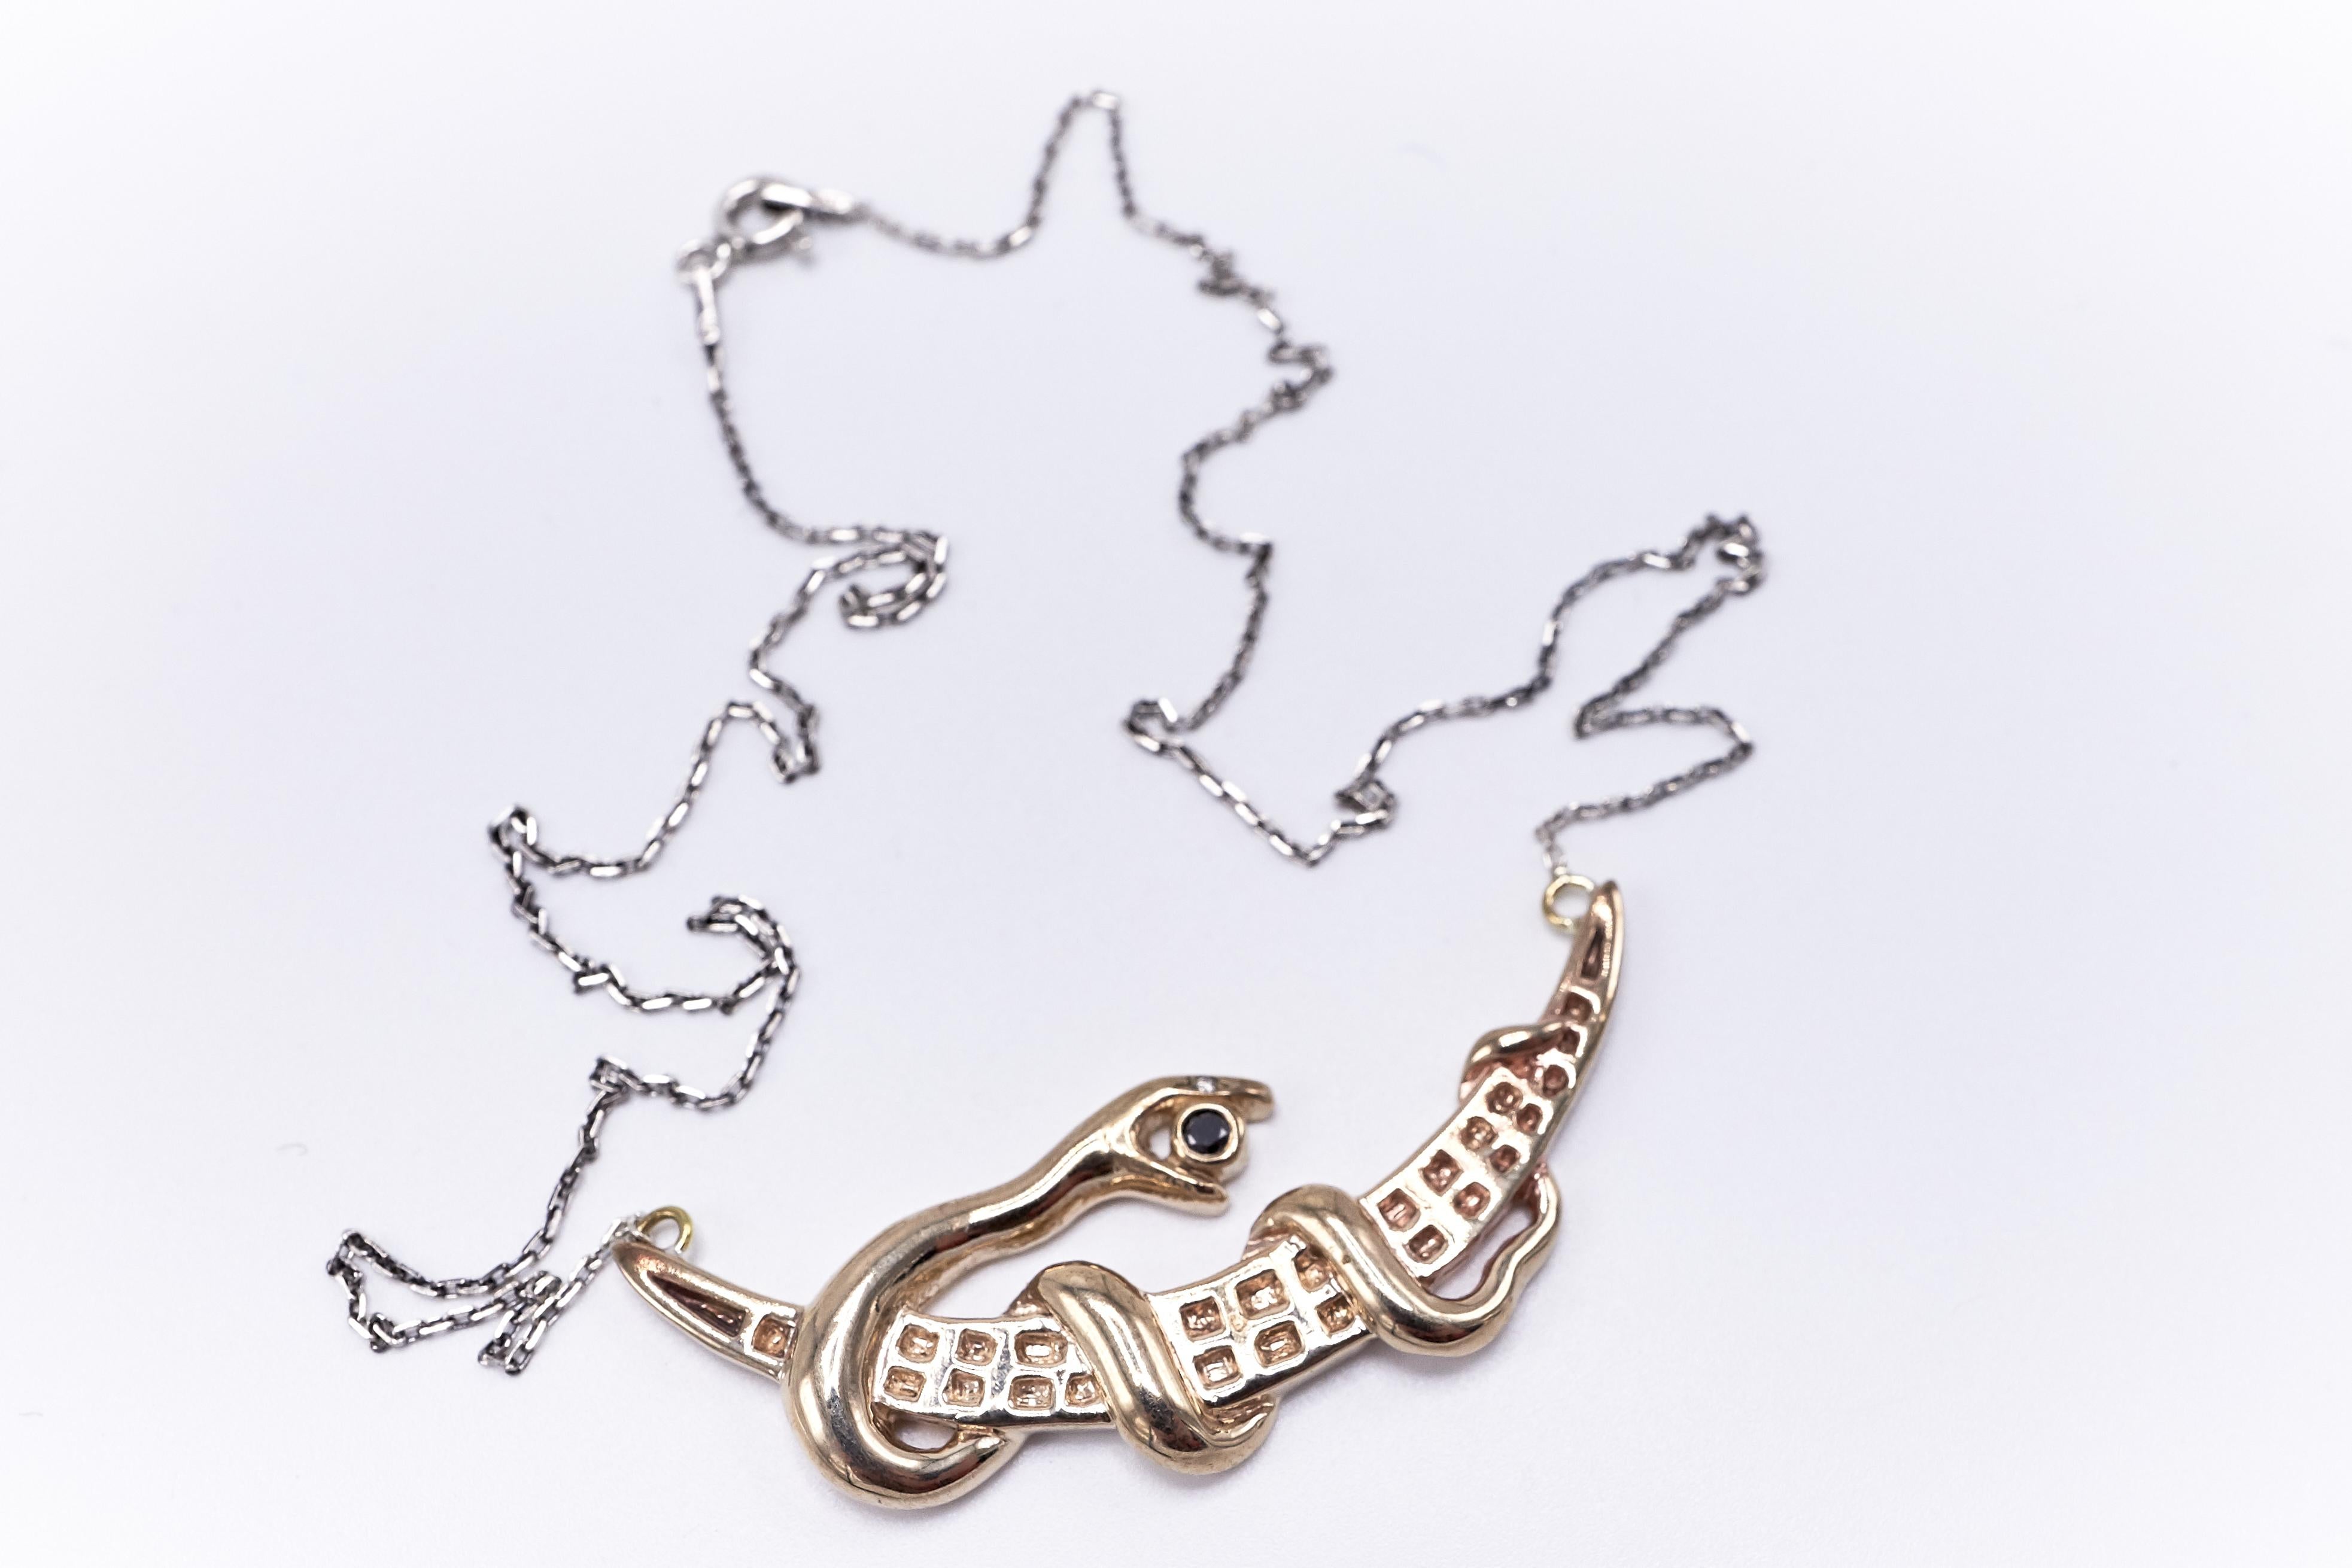 snake necklace meaning